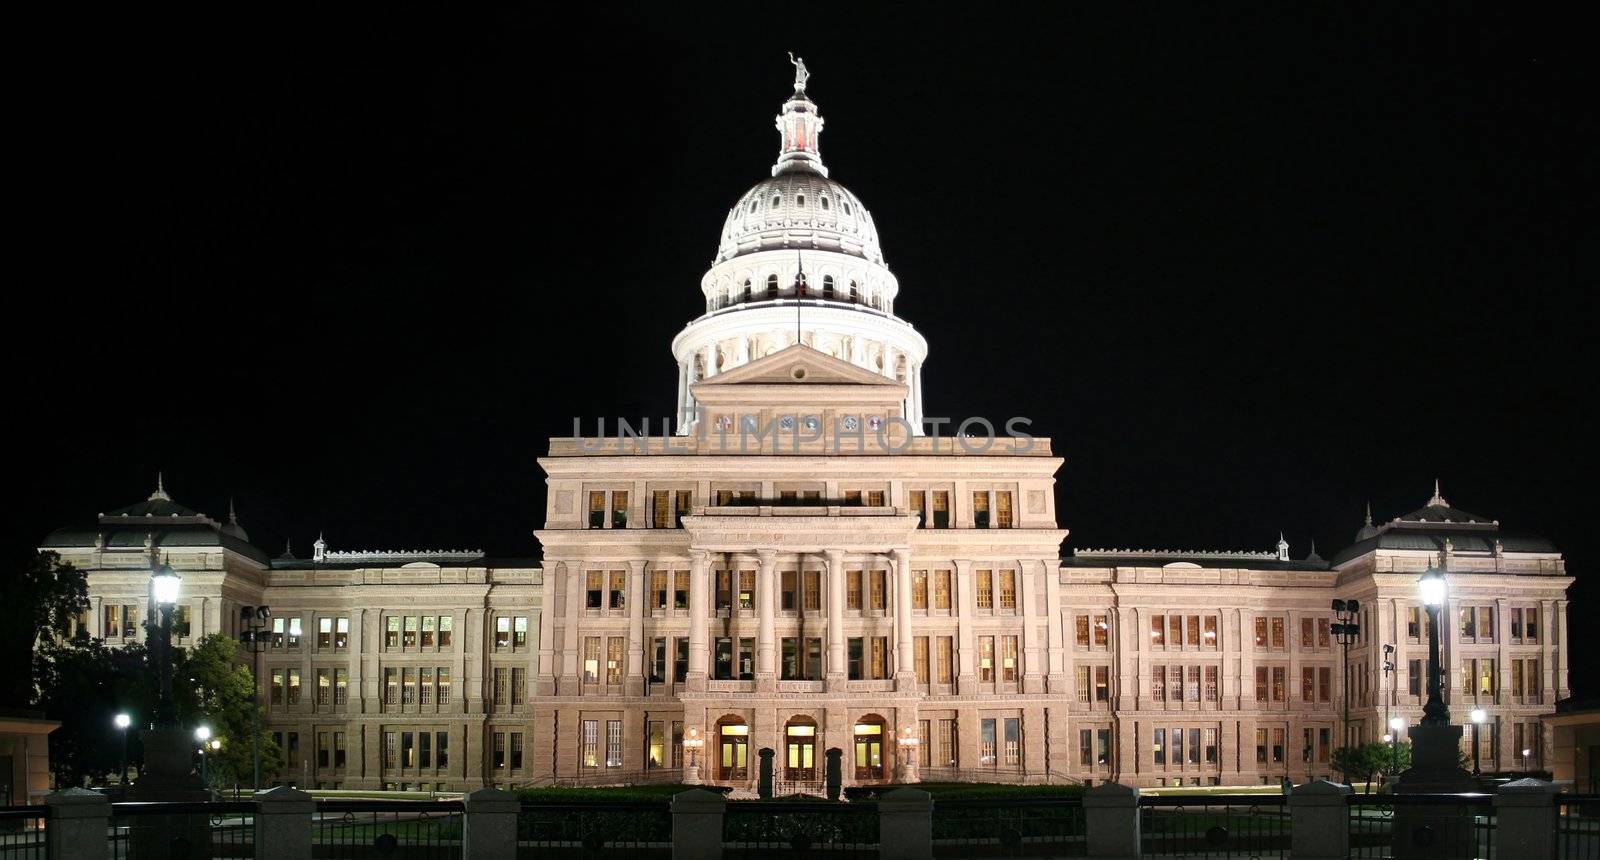 A nice clean shot of the Texas State Capitol Building in downtown Austin, Texas at night.